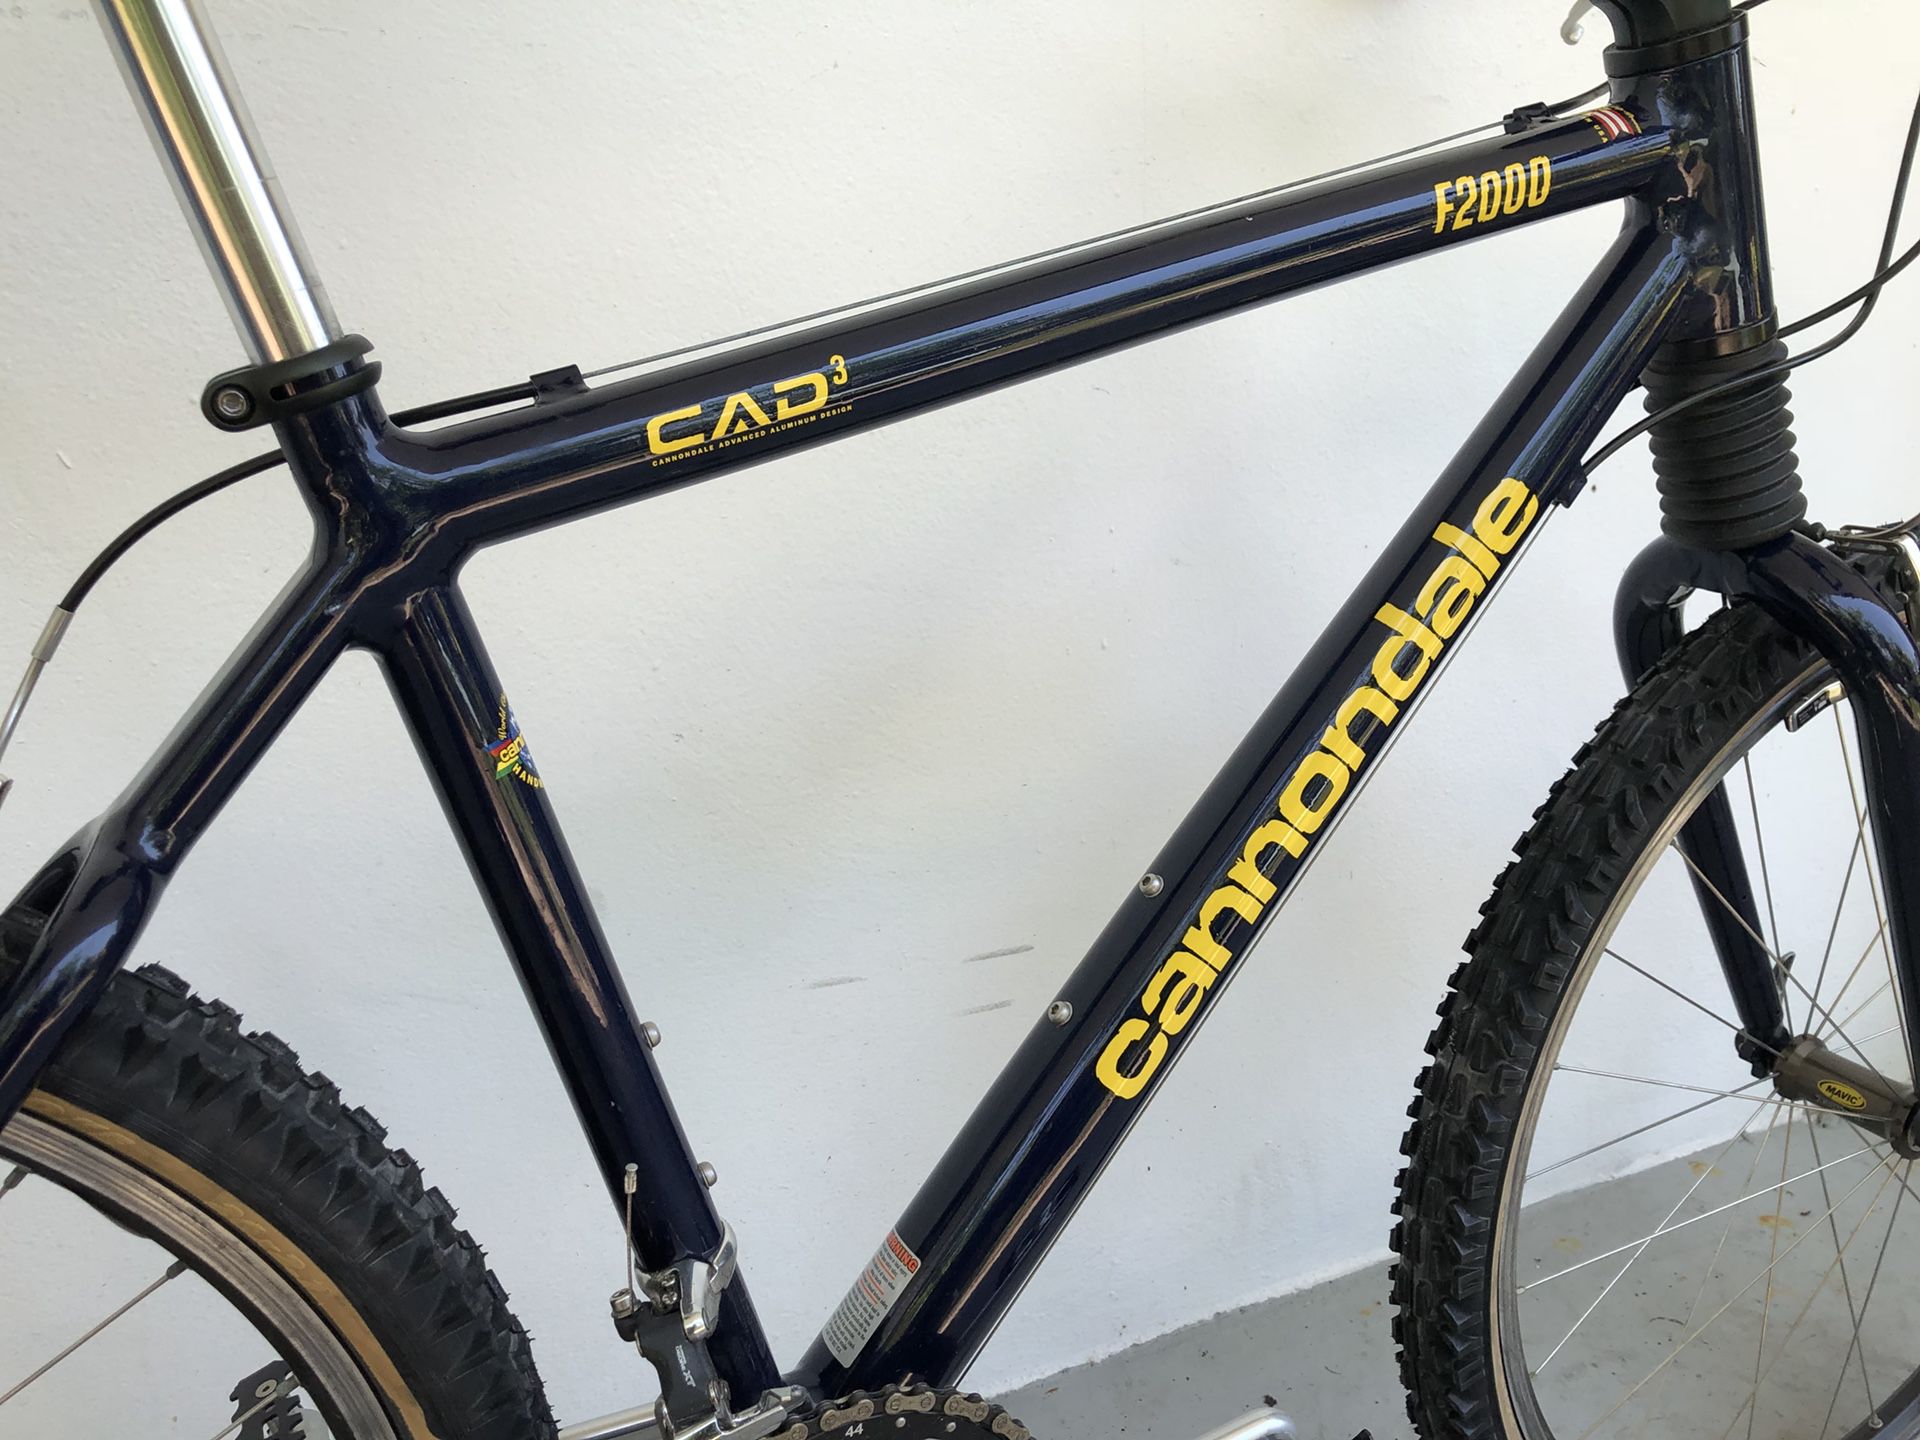 1998 Cannondale F2000 Caad3 Vintage Mountain Bike for Sale in 